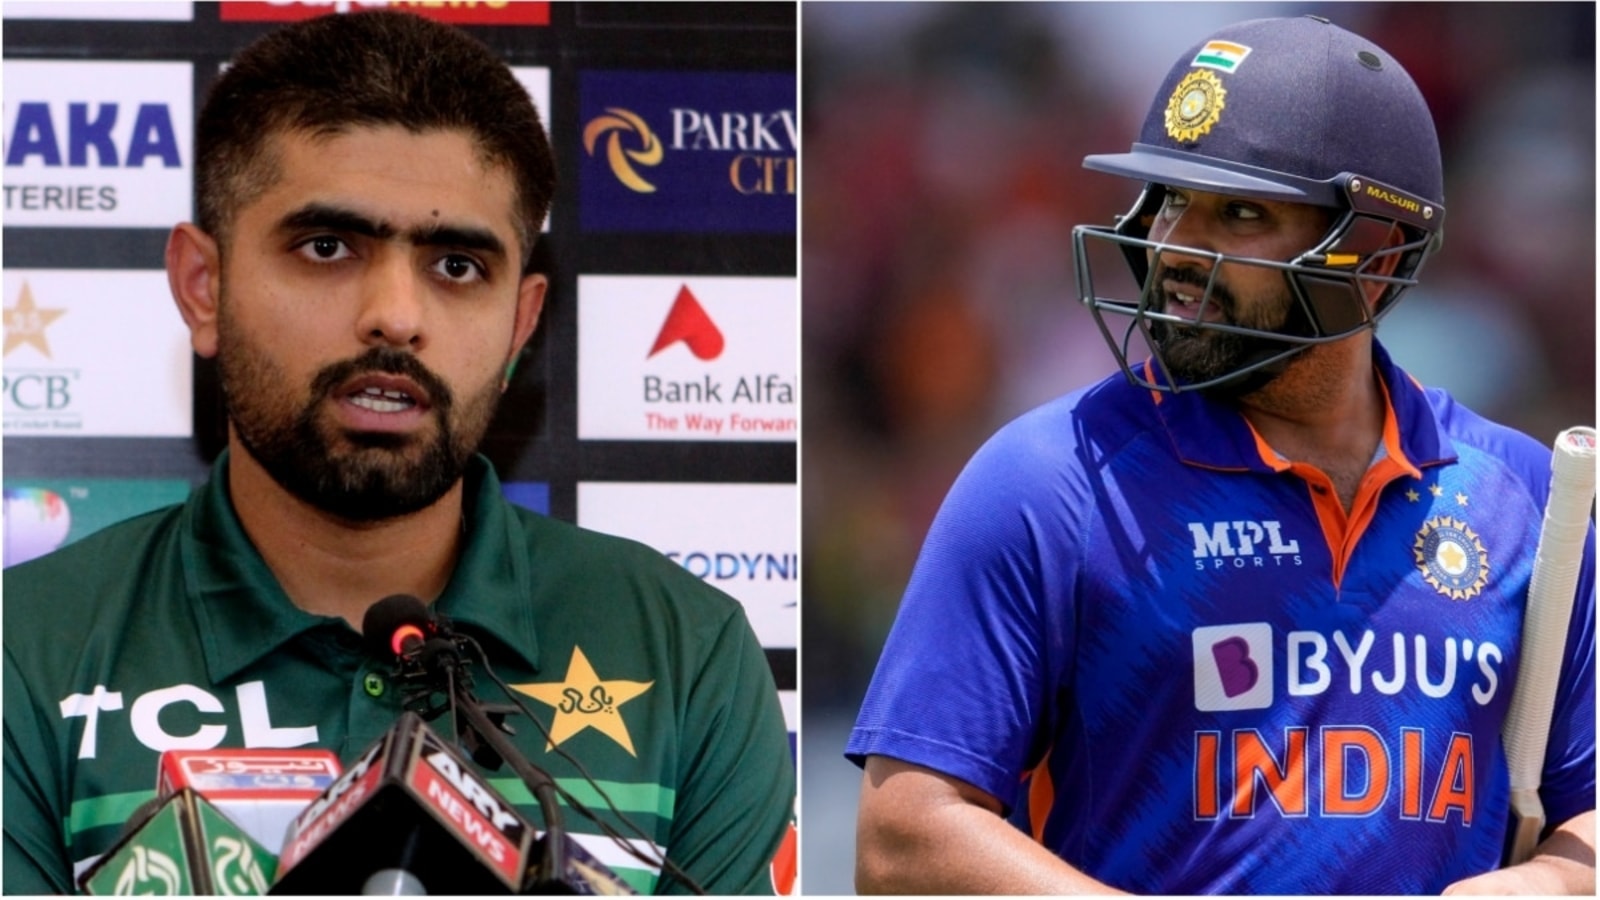 India vs Pakistan T20, Asia Cup 2022 Live Streaming When and where to watch Cricket